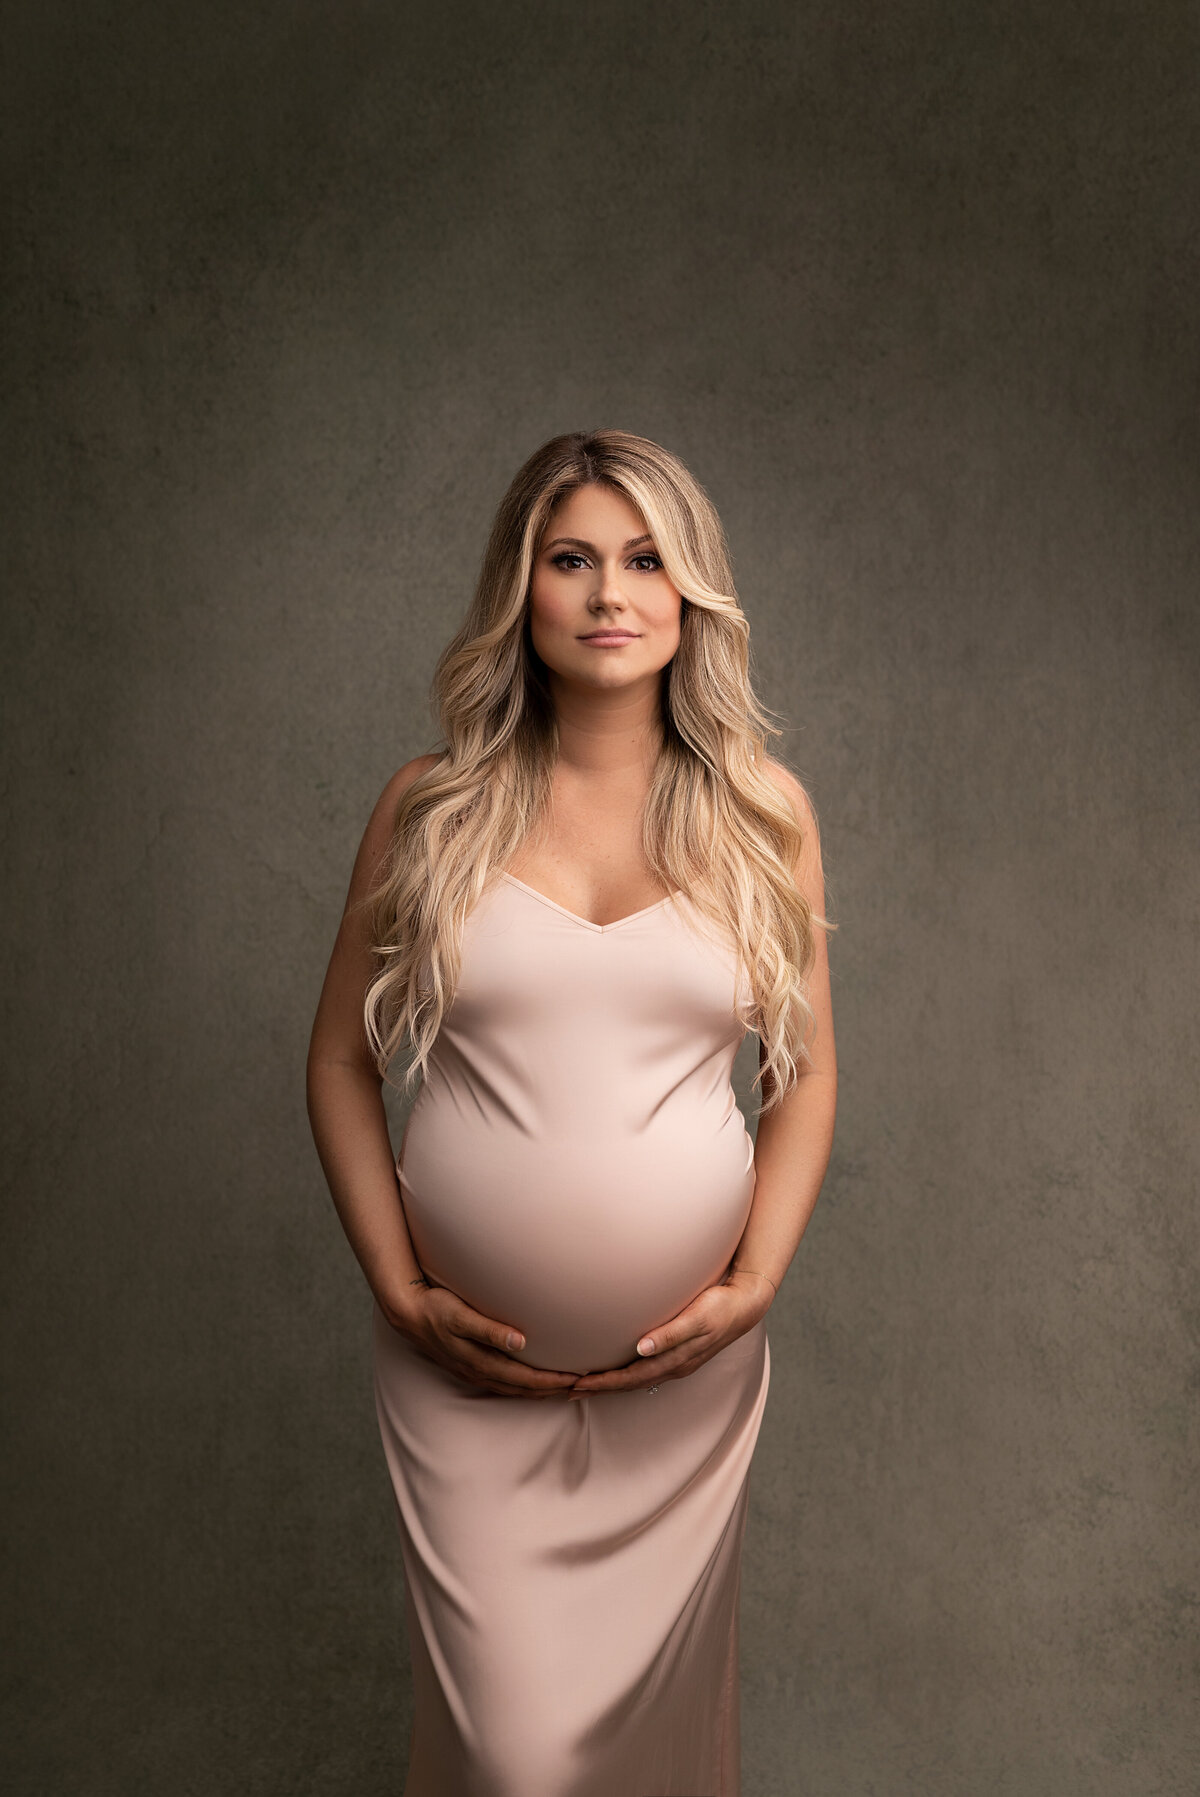 New Jersey's best maternity photographer Katie Marshall captures expectant mom for fine art maternity photos. Mom is standing in a long pink silk maternity slip facing the camera. Both of her hands are underneath her baby bump. She is looking at the camera with a closed-mouth smile.